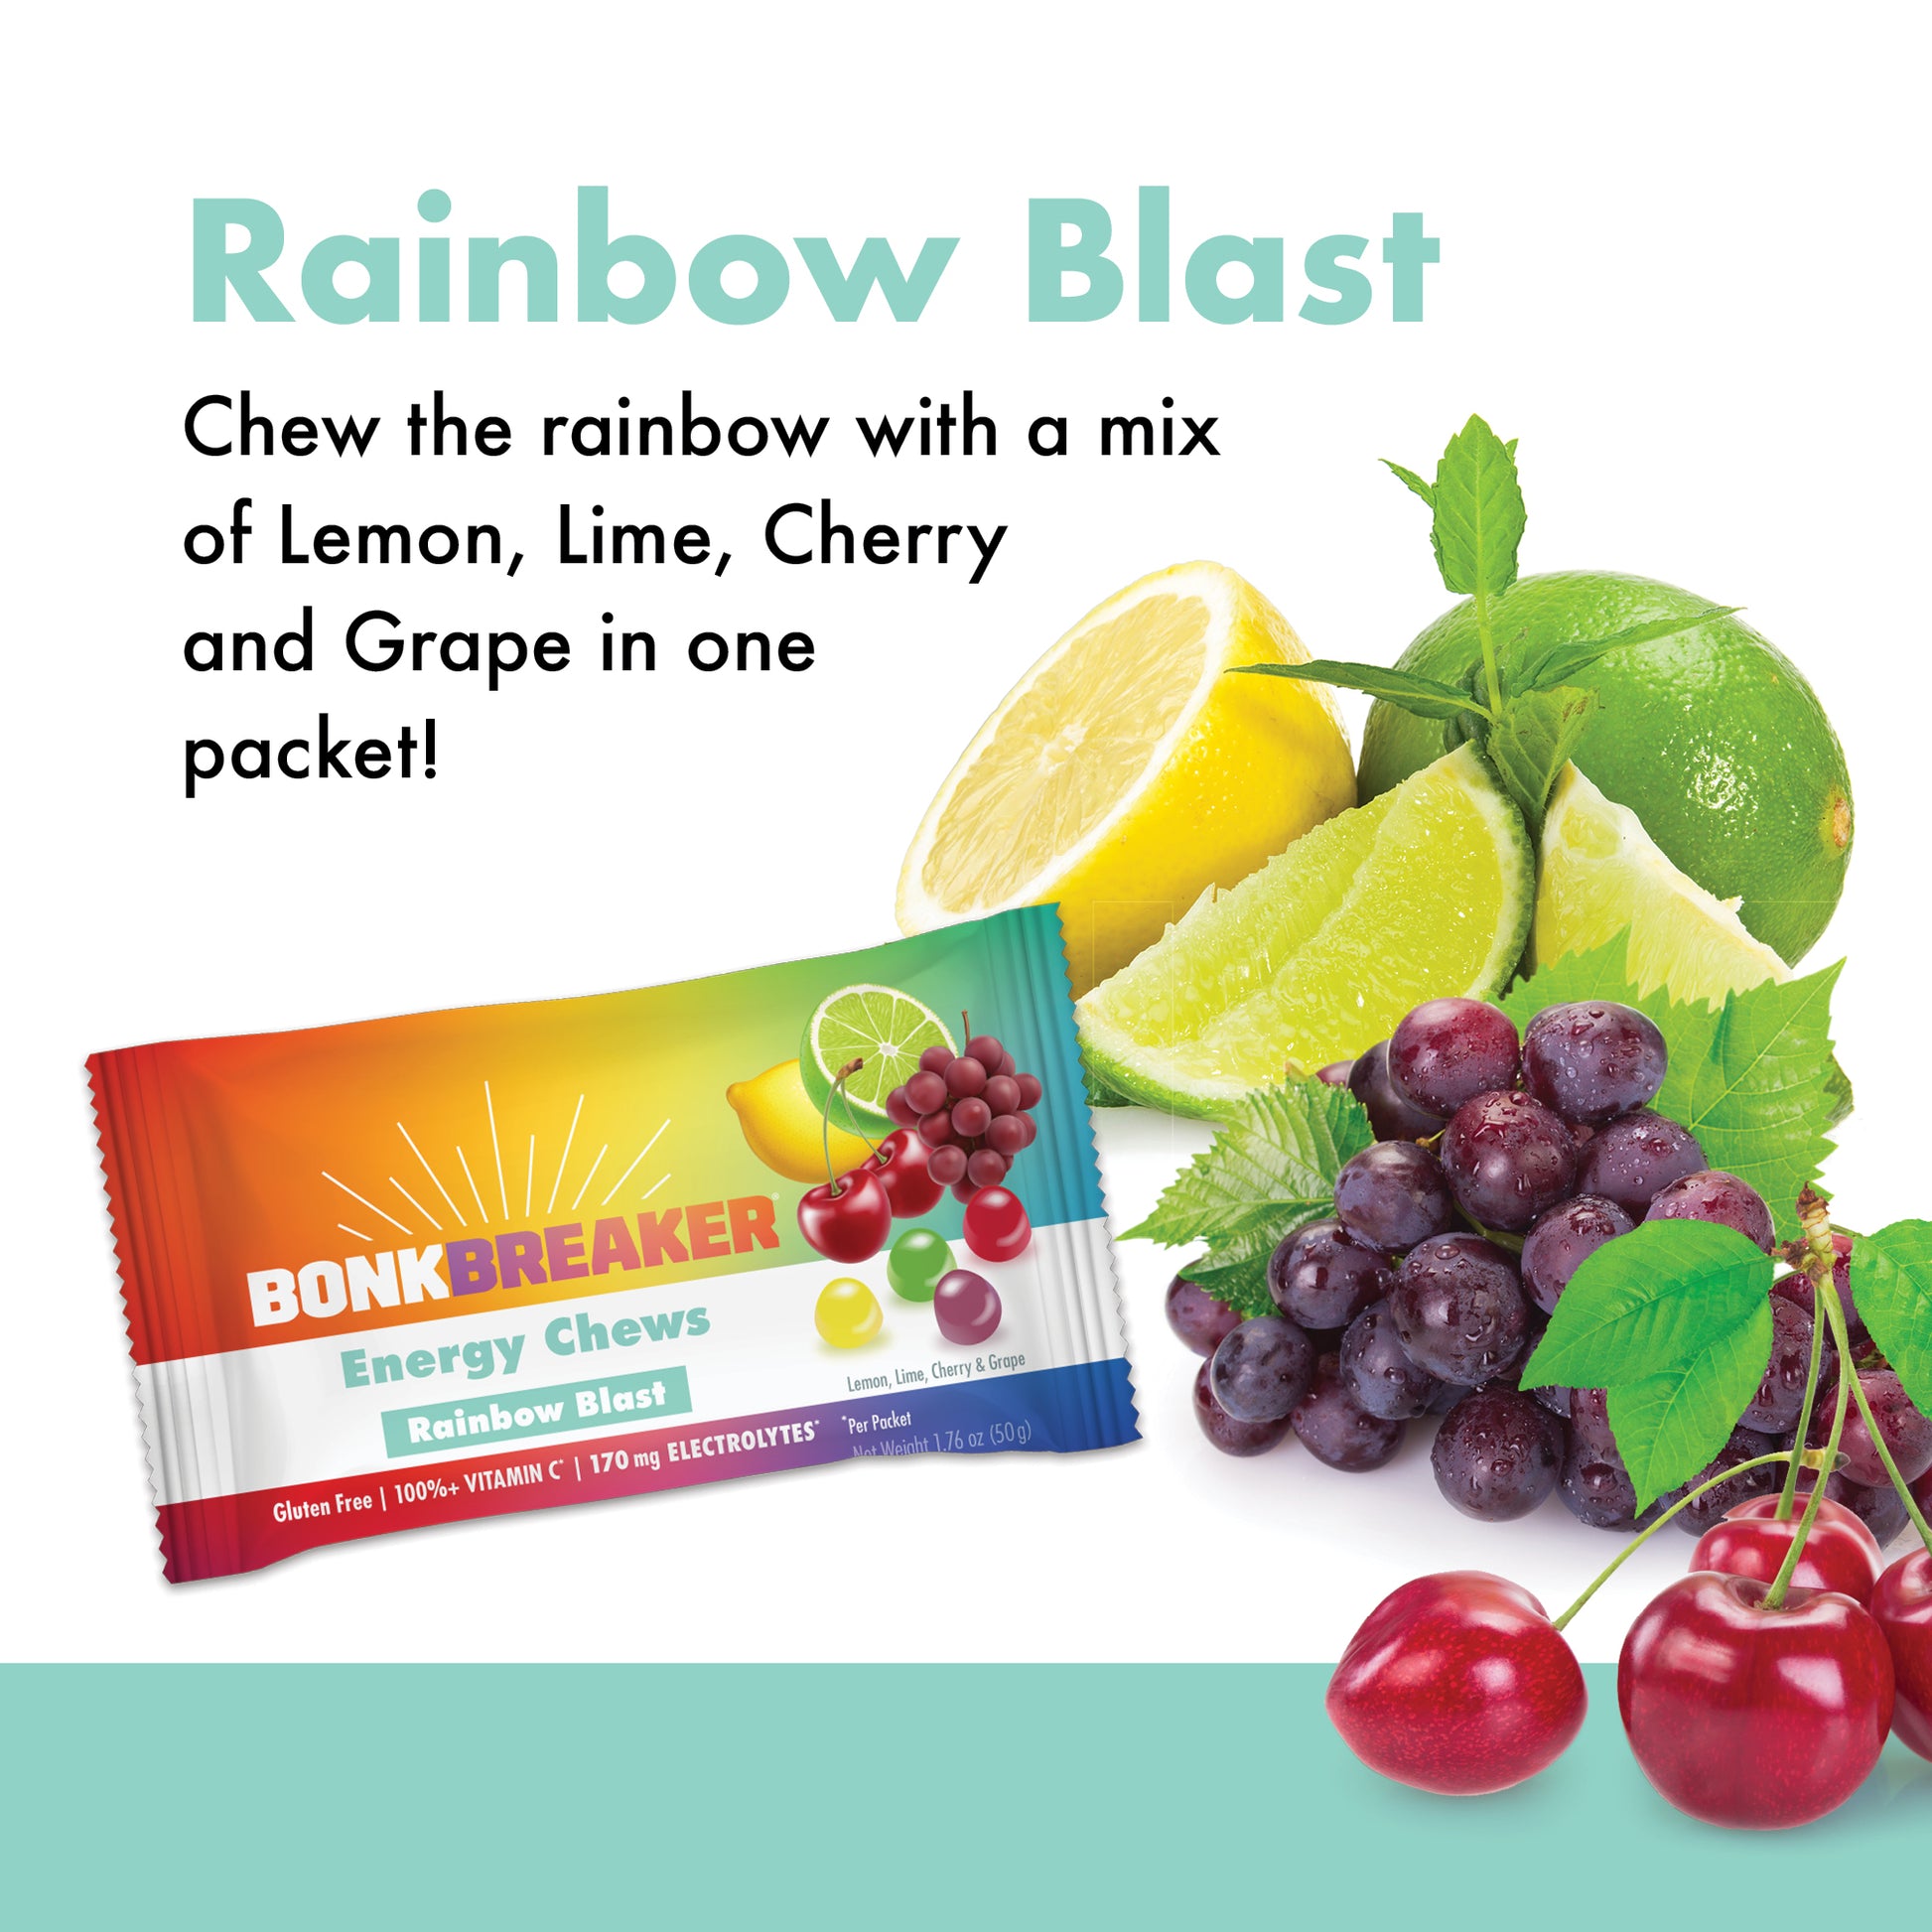 Rainbow Blast - Chew the rainbow with a mix of Lemon, Lime, Cherry, and Grape in one packet.